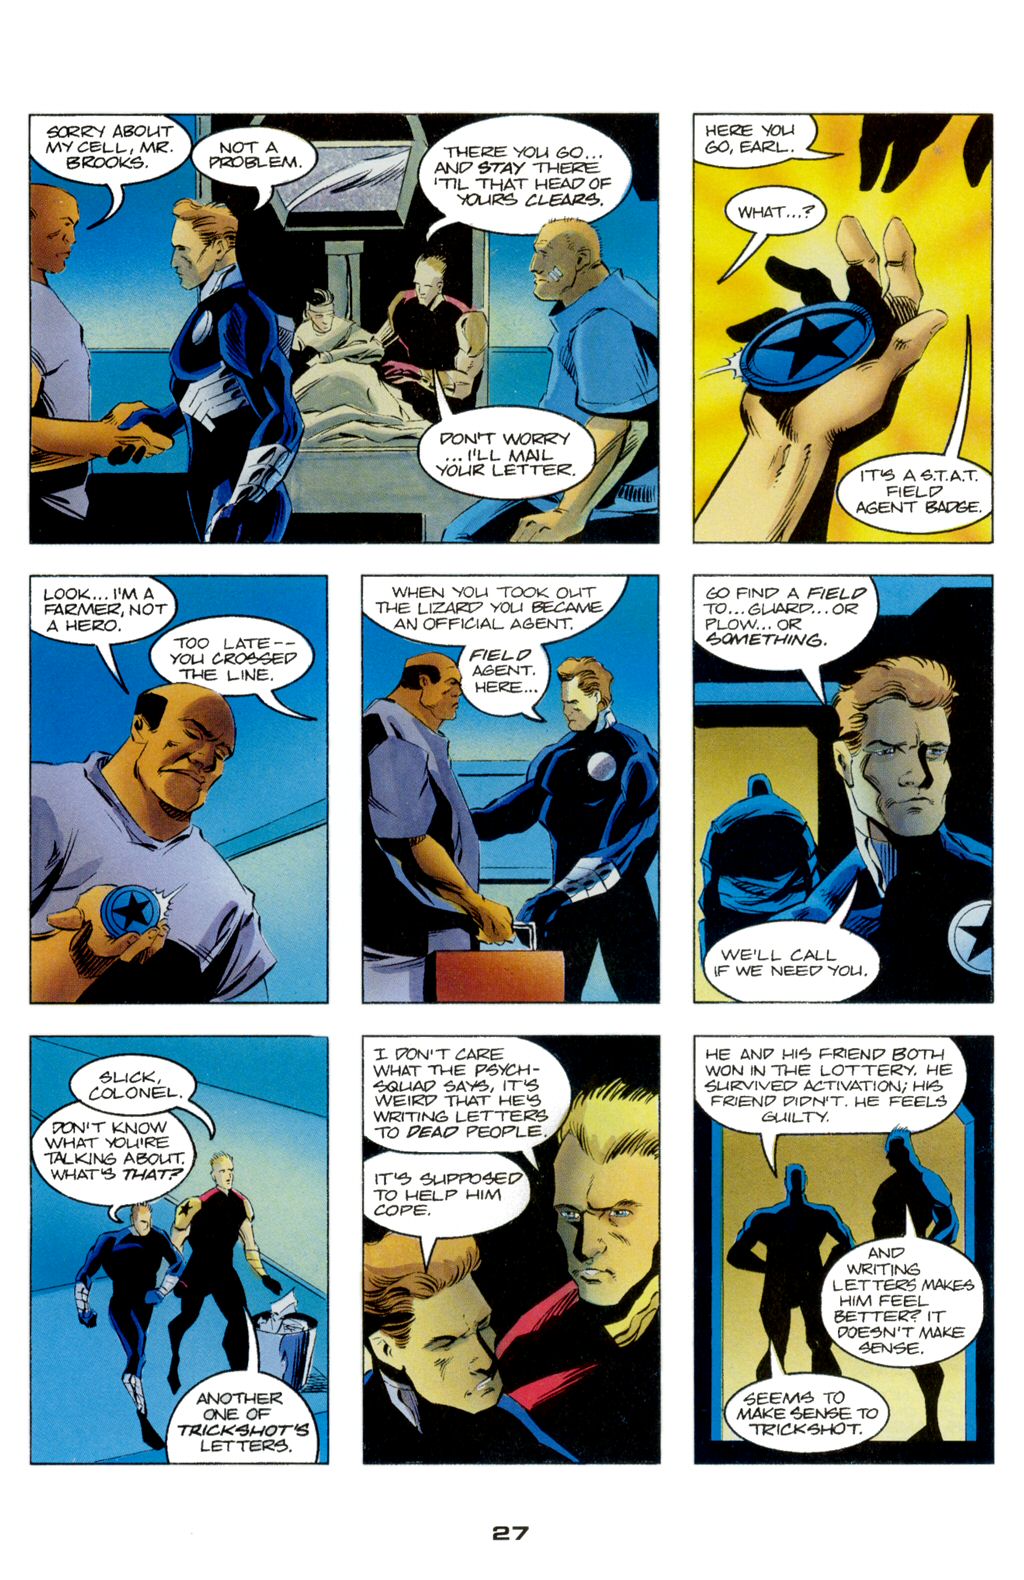 Read online S.T.A.T. comic -  Issue # Full - 29